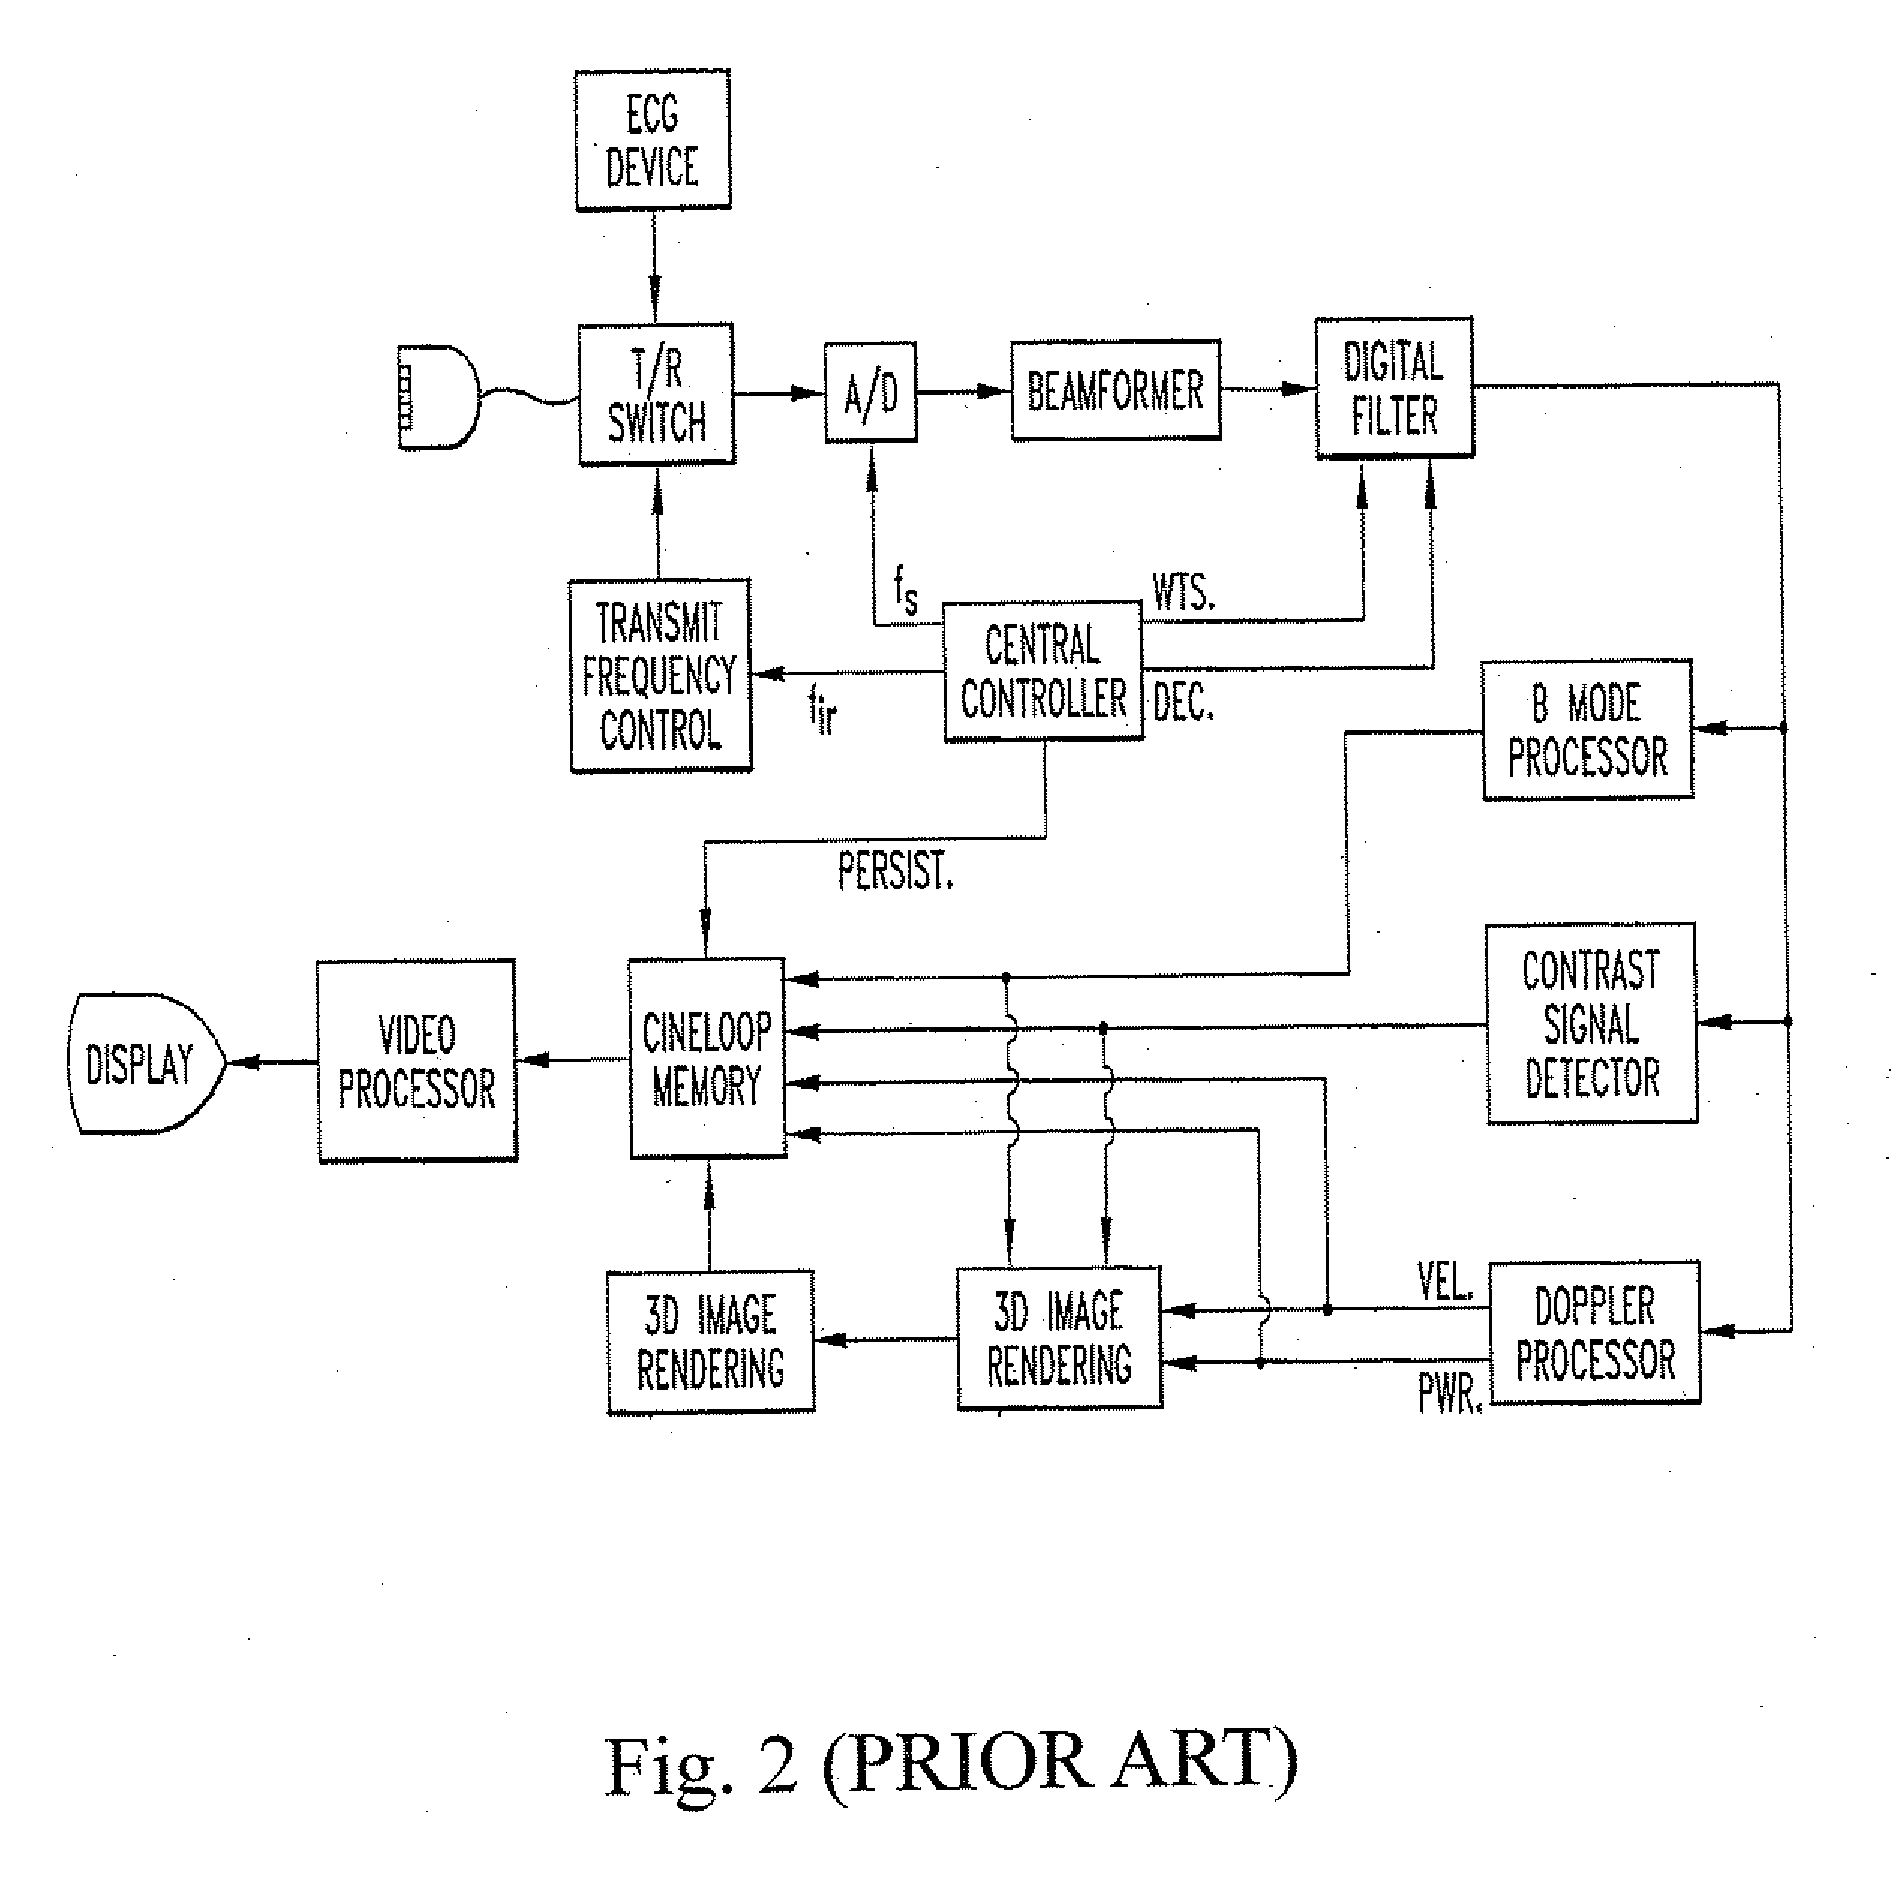 Apparatus and method for providing a dynamic 3D ultrasound image